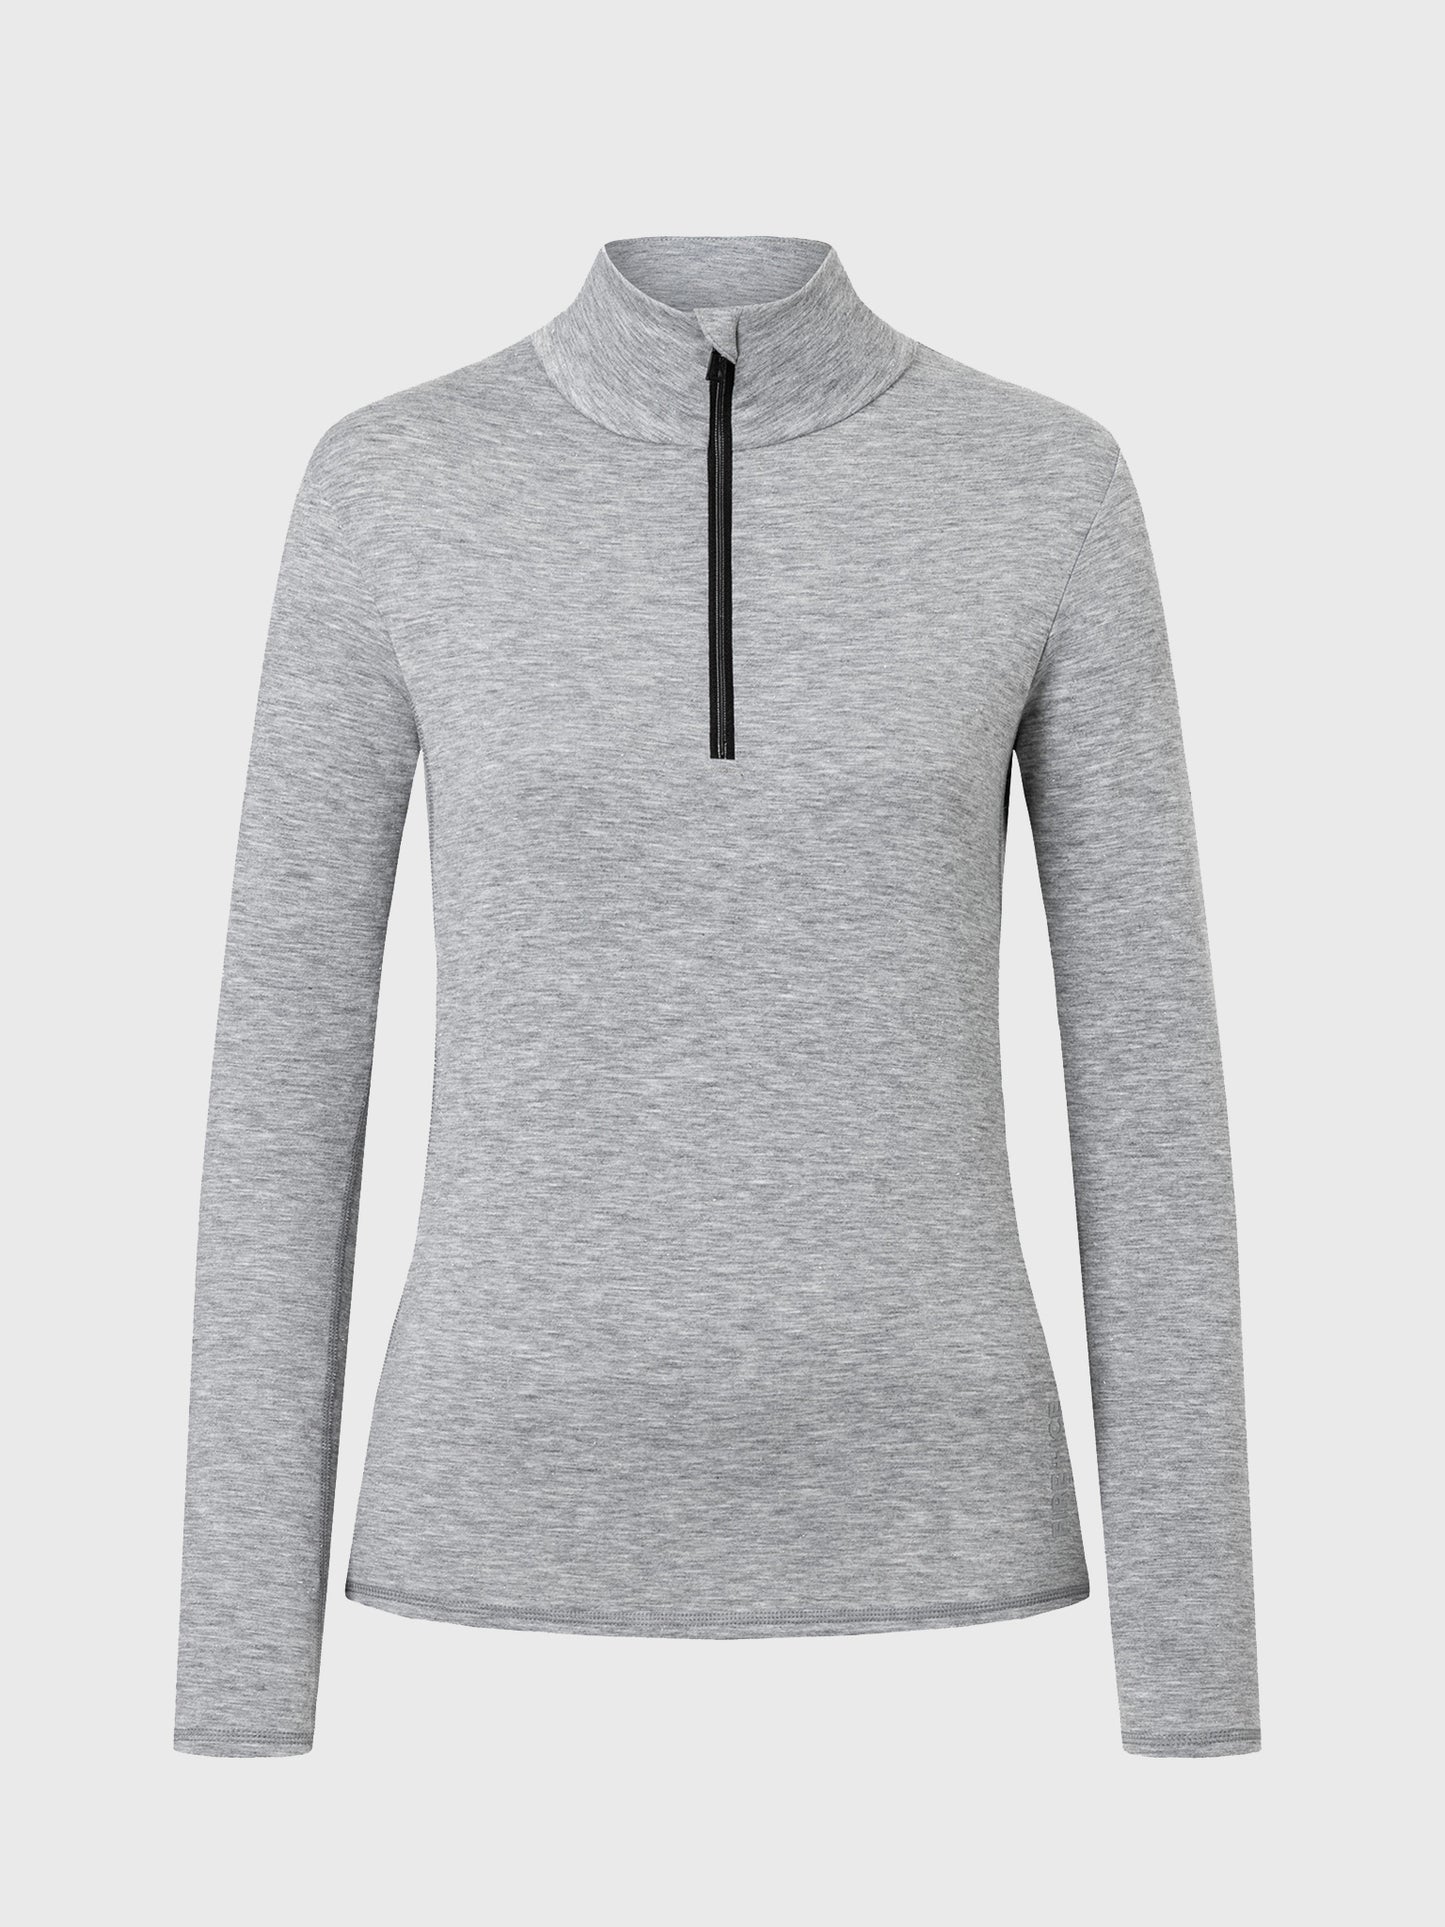 Bogner Fire + Ice Margo First Layer Baselayer